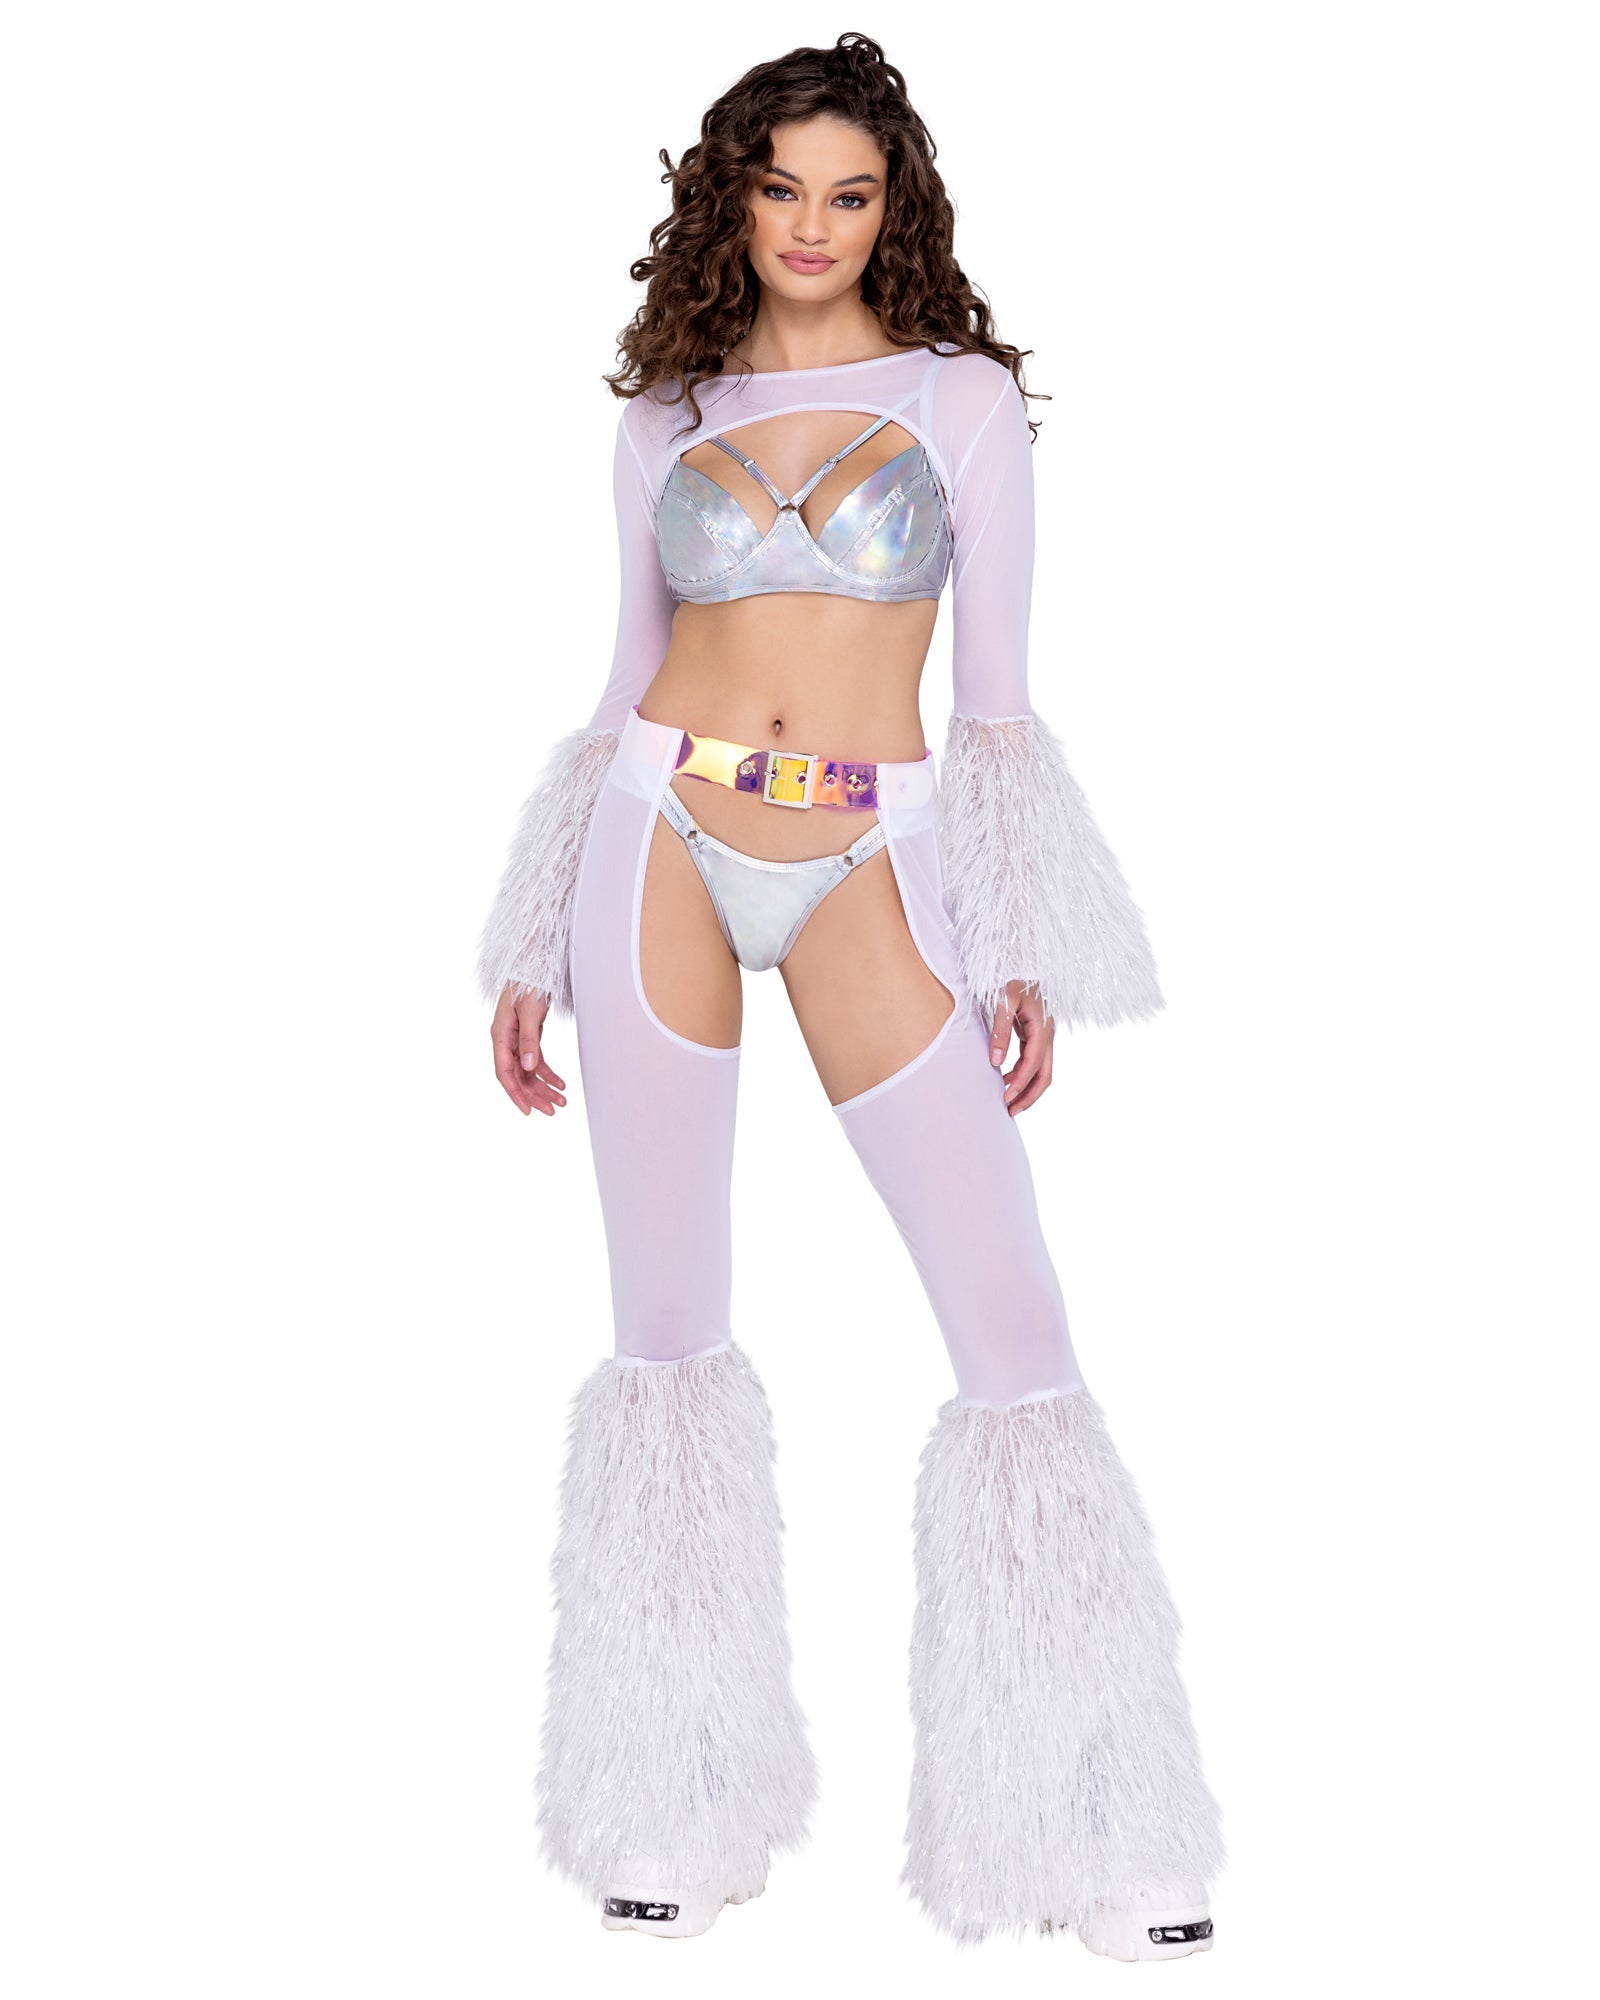 Hologram Bra with Underwire - Rave & Festival Wear-Roma Costume